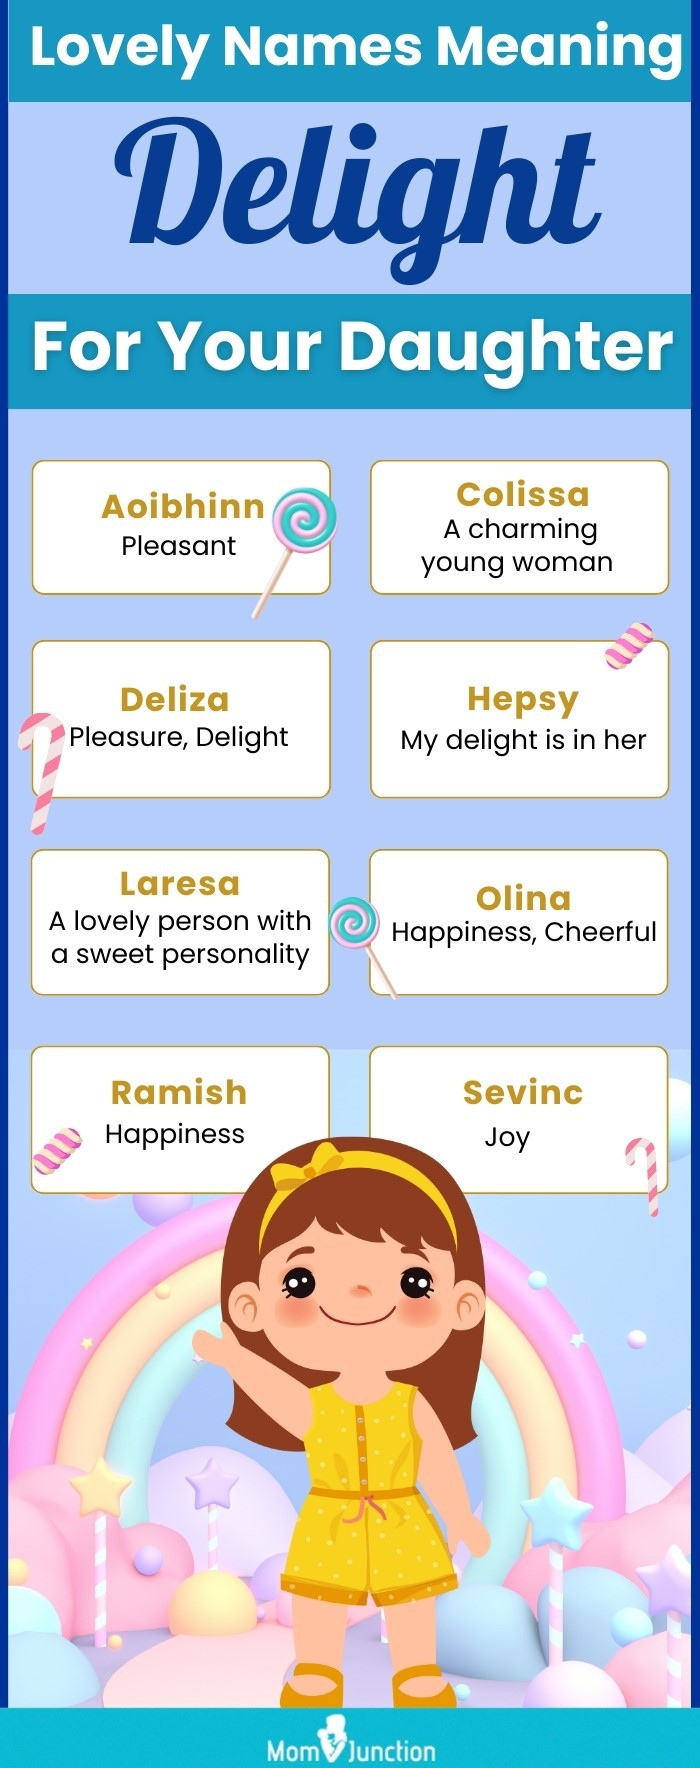 lovely names meaning delight for your daughter (infographic)